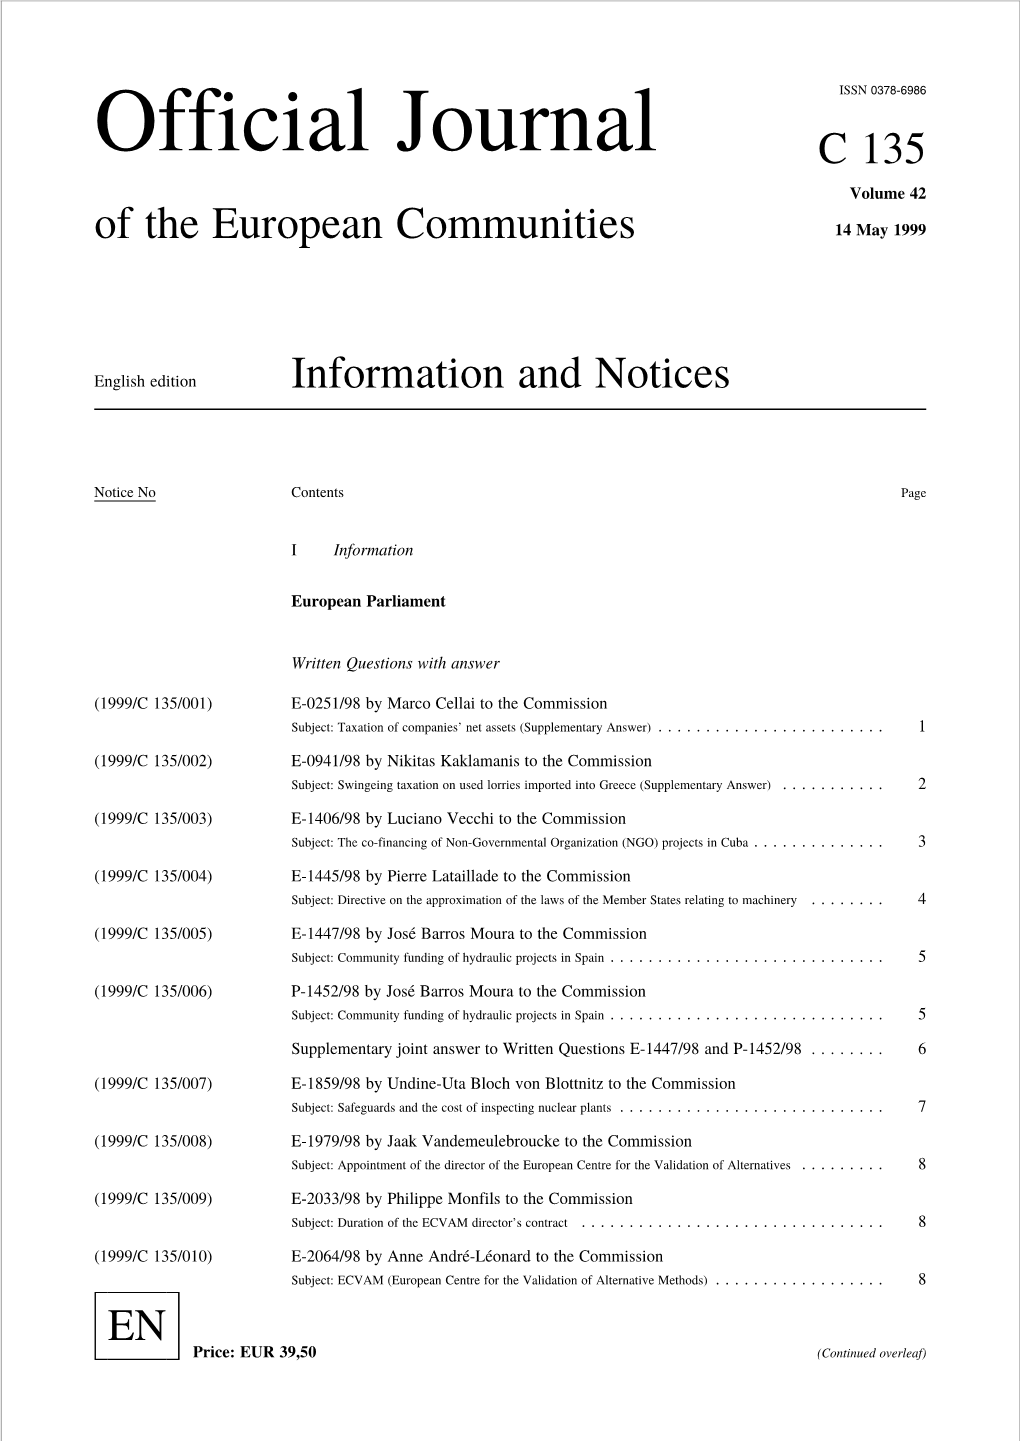 Official Journal C 135 Volume 42 of the European Communities 14 May 1999